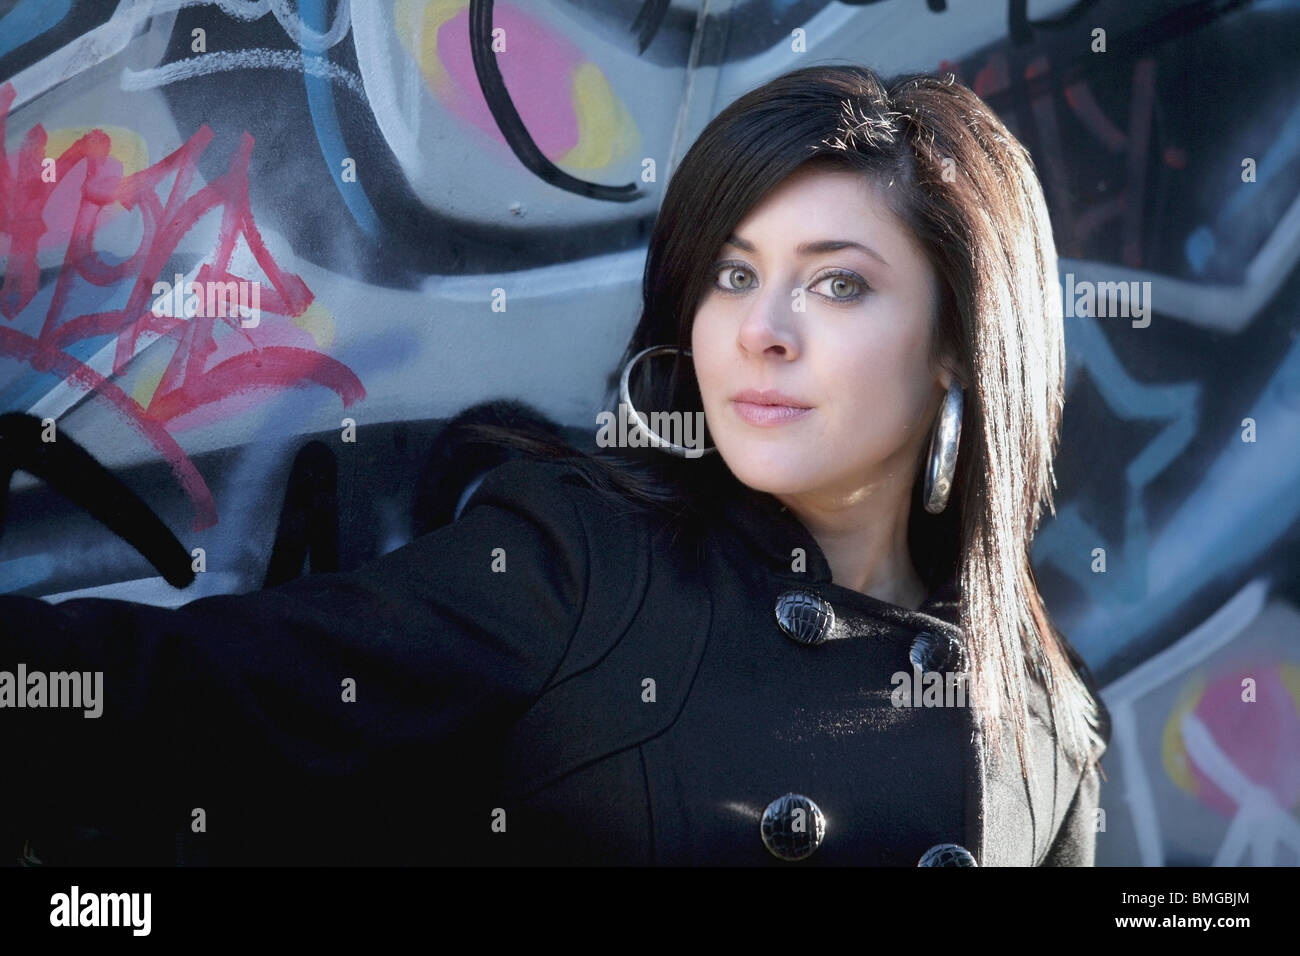 A Young Woman Against A Wall With Graffiti Stock Photo